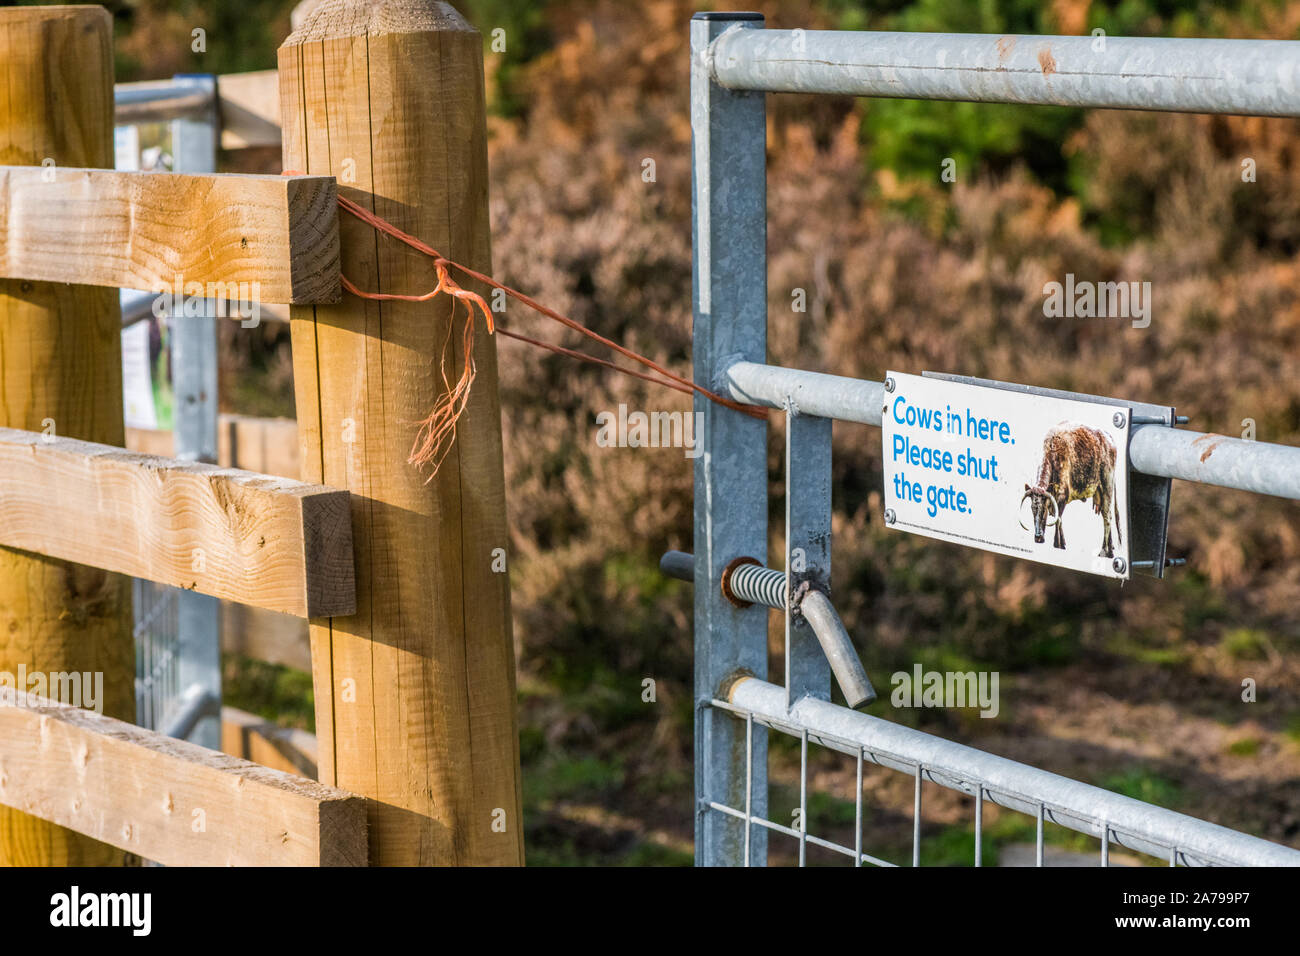 Cows in here. Please shut the gate. sign attached to a metal gate. Stock Photo